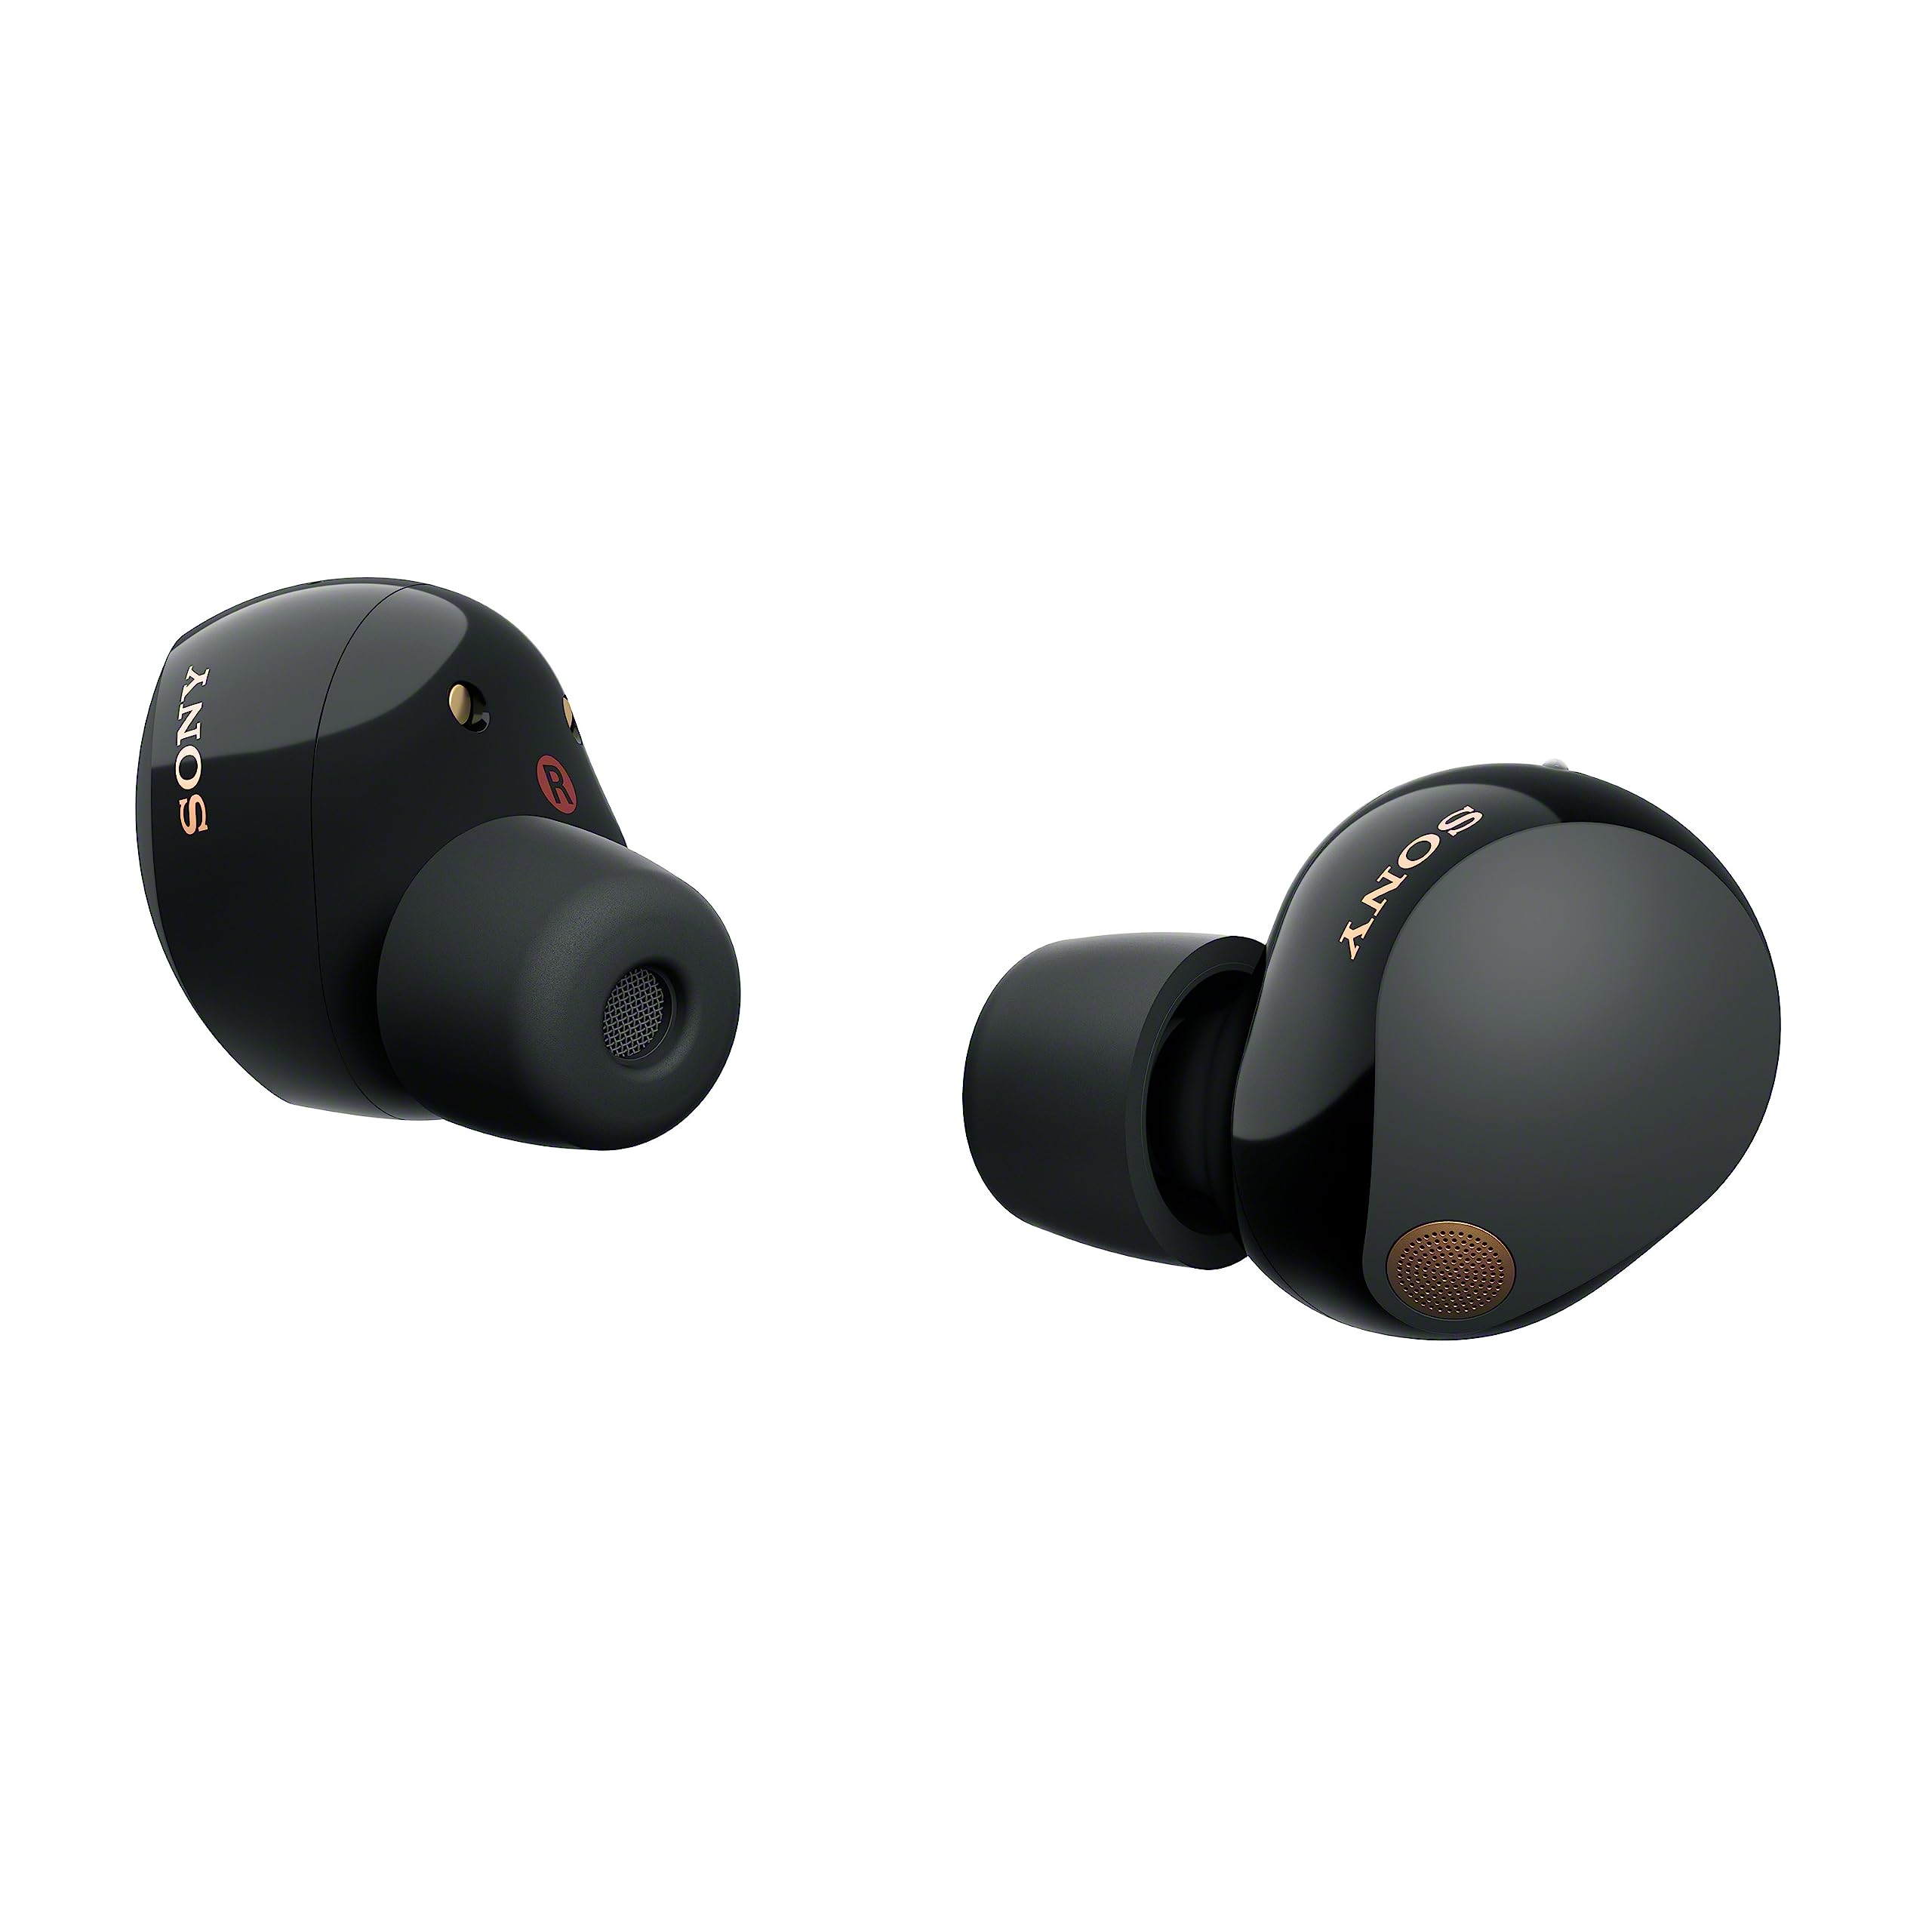 Sony WF-1000XM5 The Best Truly Wireless Bluetooth Noise Canceling Earbuds Headphones with Alexa Built in, Black- New Model